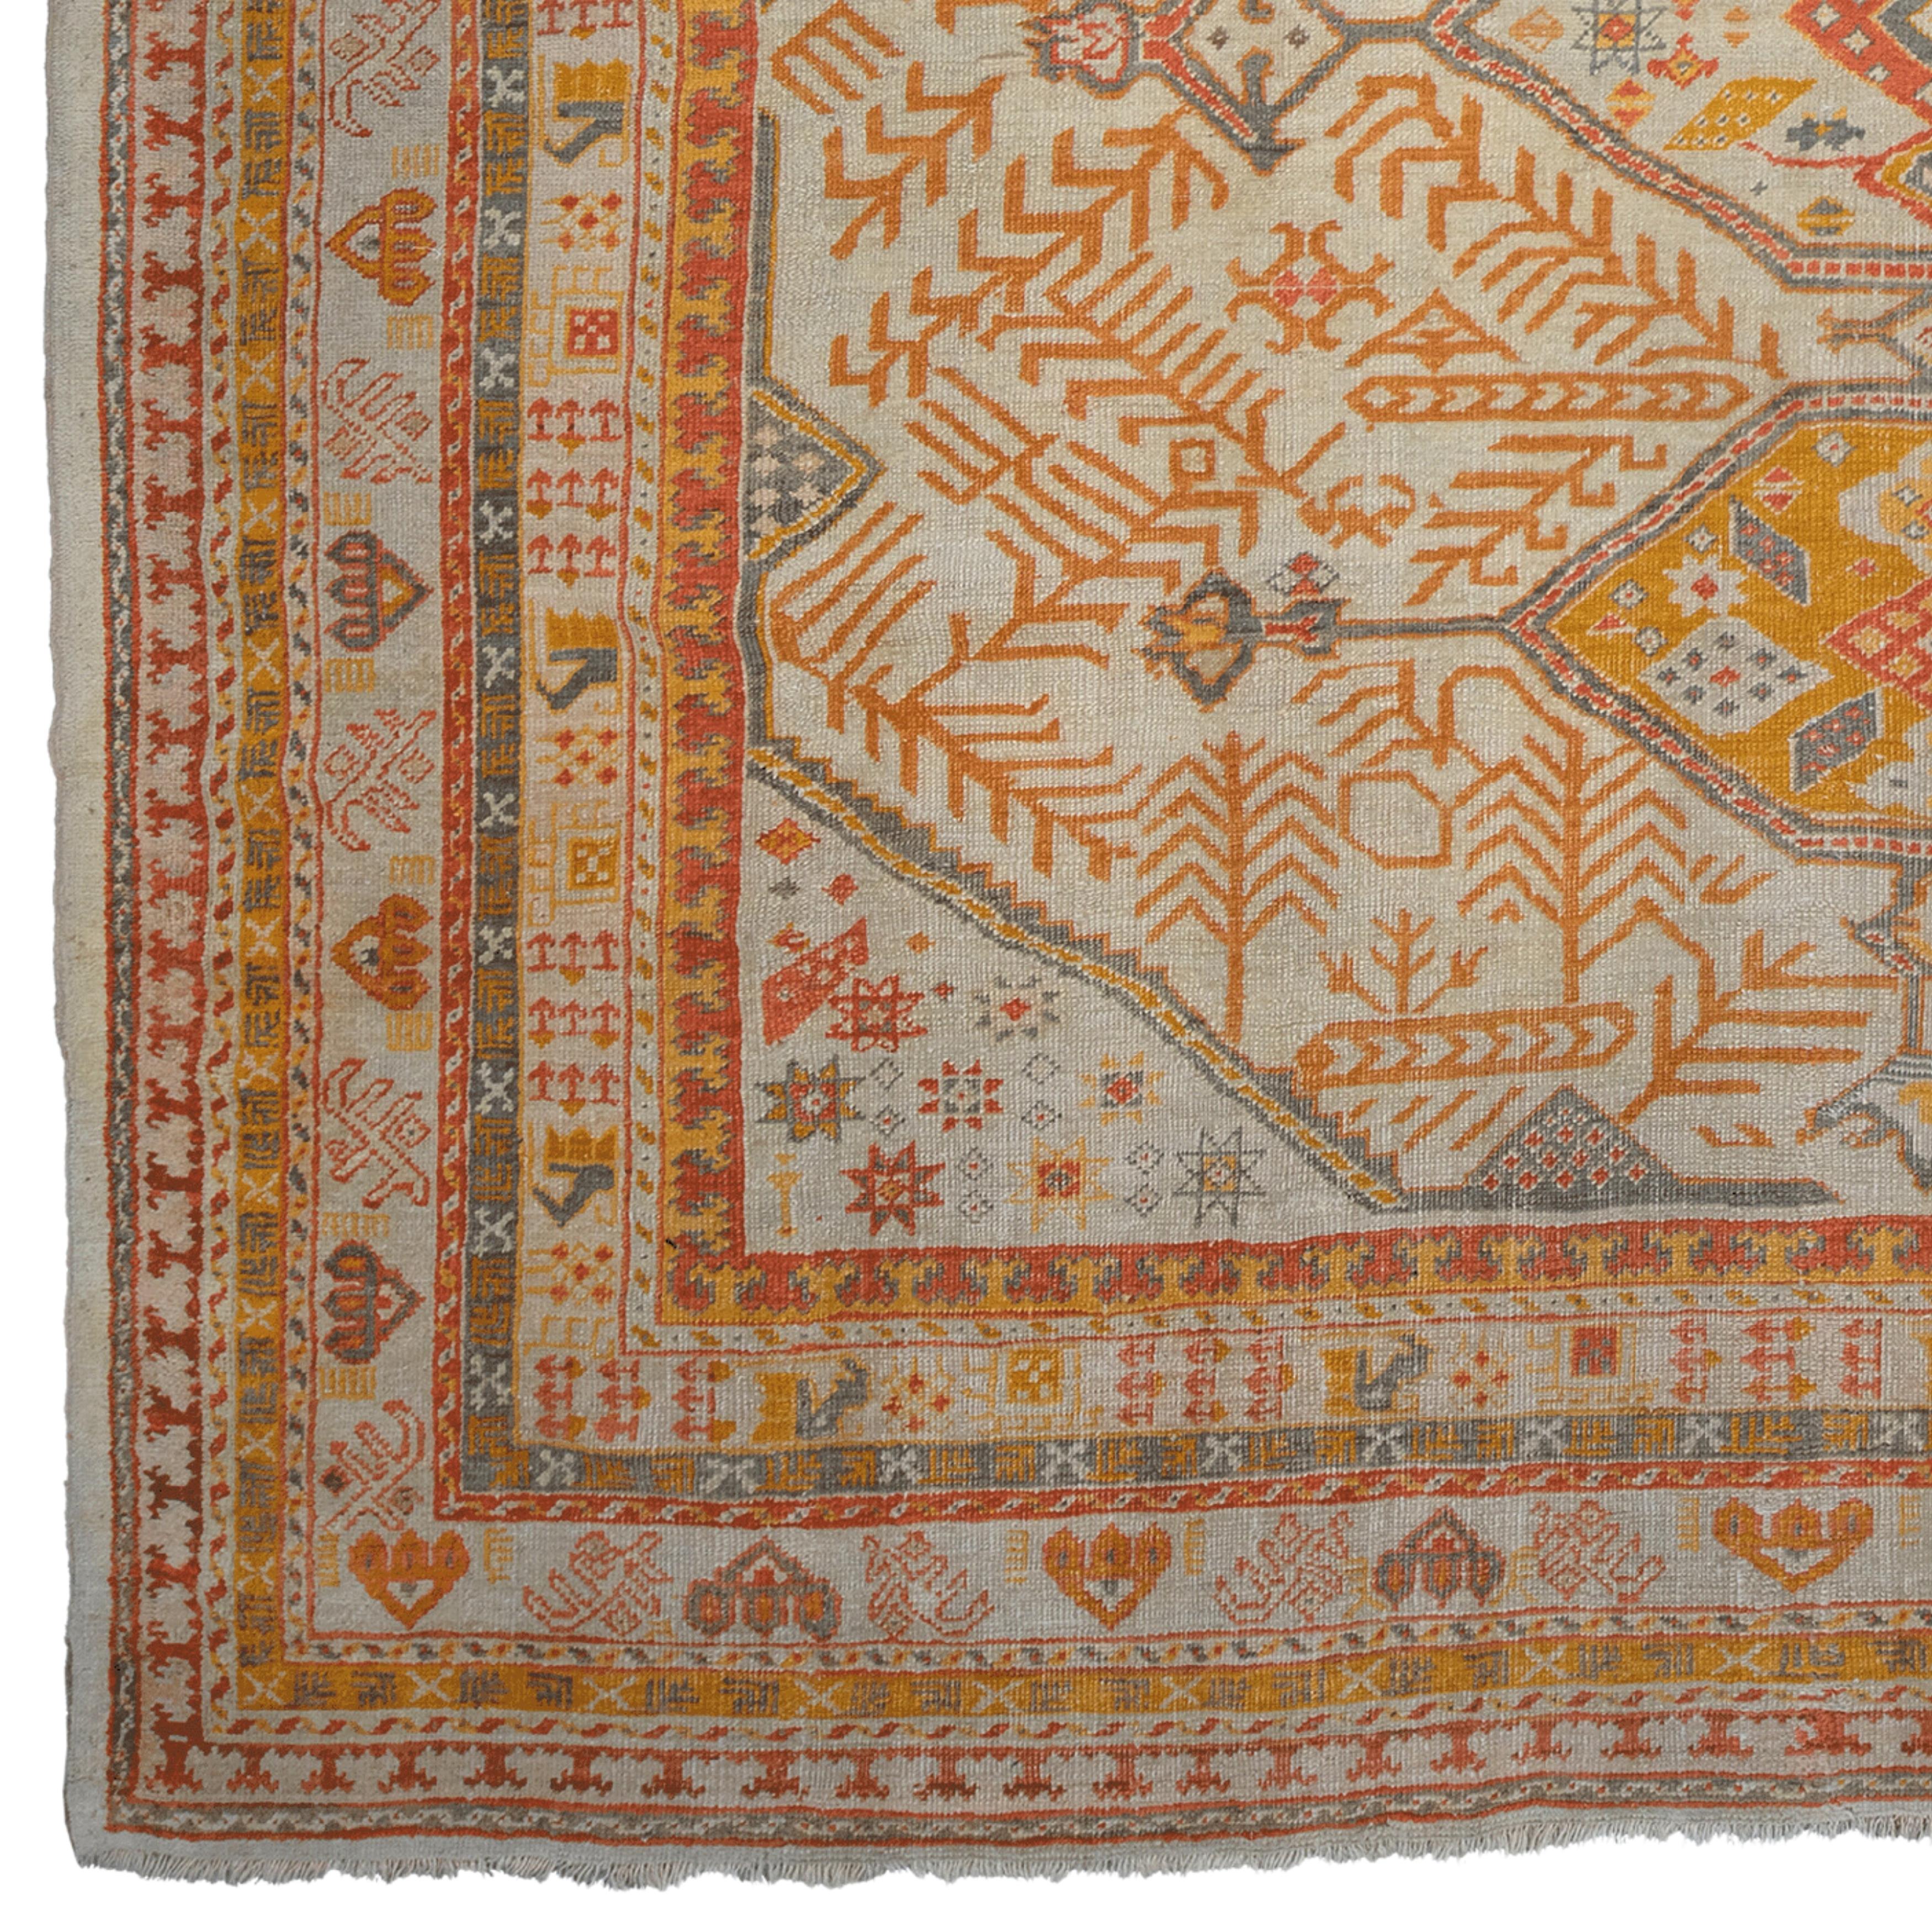 Antique Ushak Rug - 19th Century Antique Turkish Rug
Size: 305x360 cm

This elegant 19th century Ushak carpet brings the elegance and sophisticated design of the Ottoman period into your home. With its rich color palette and detailed workmanship,